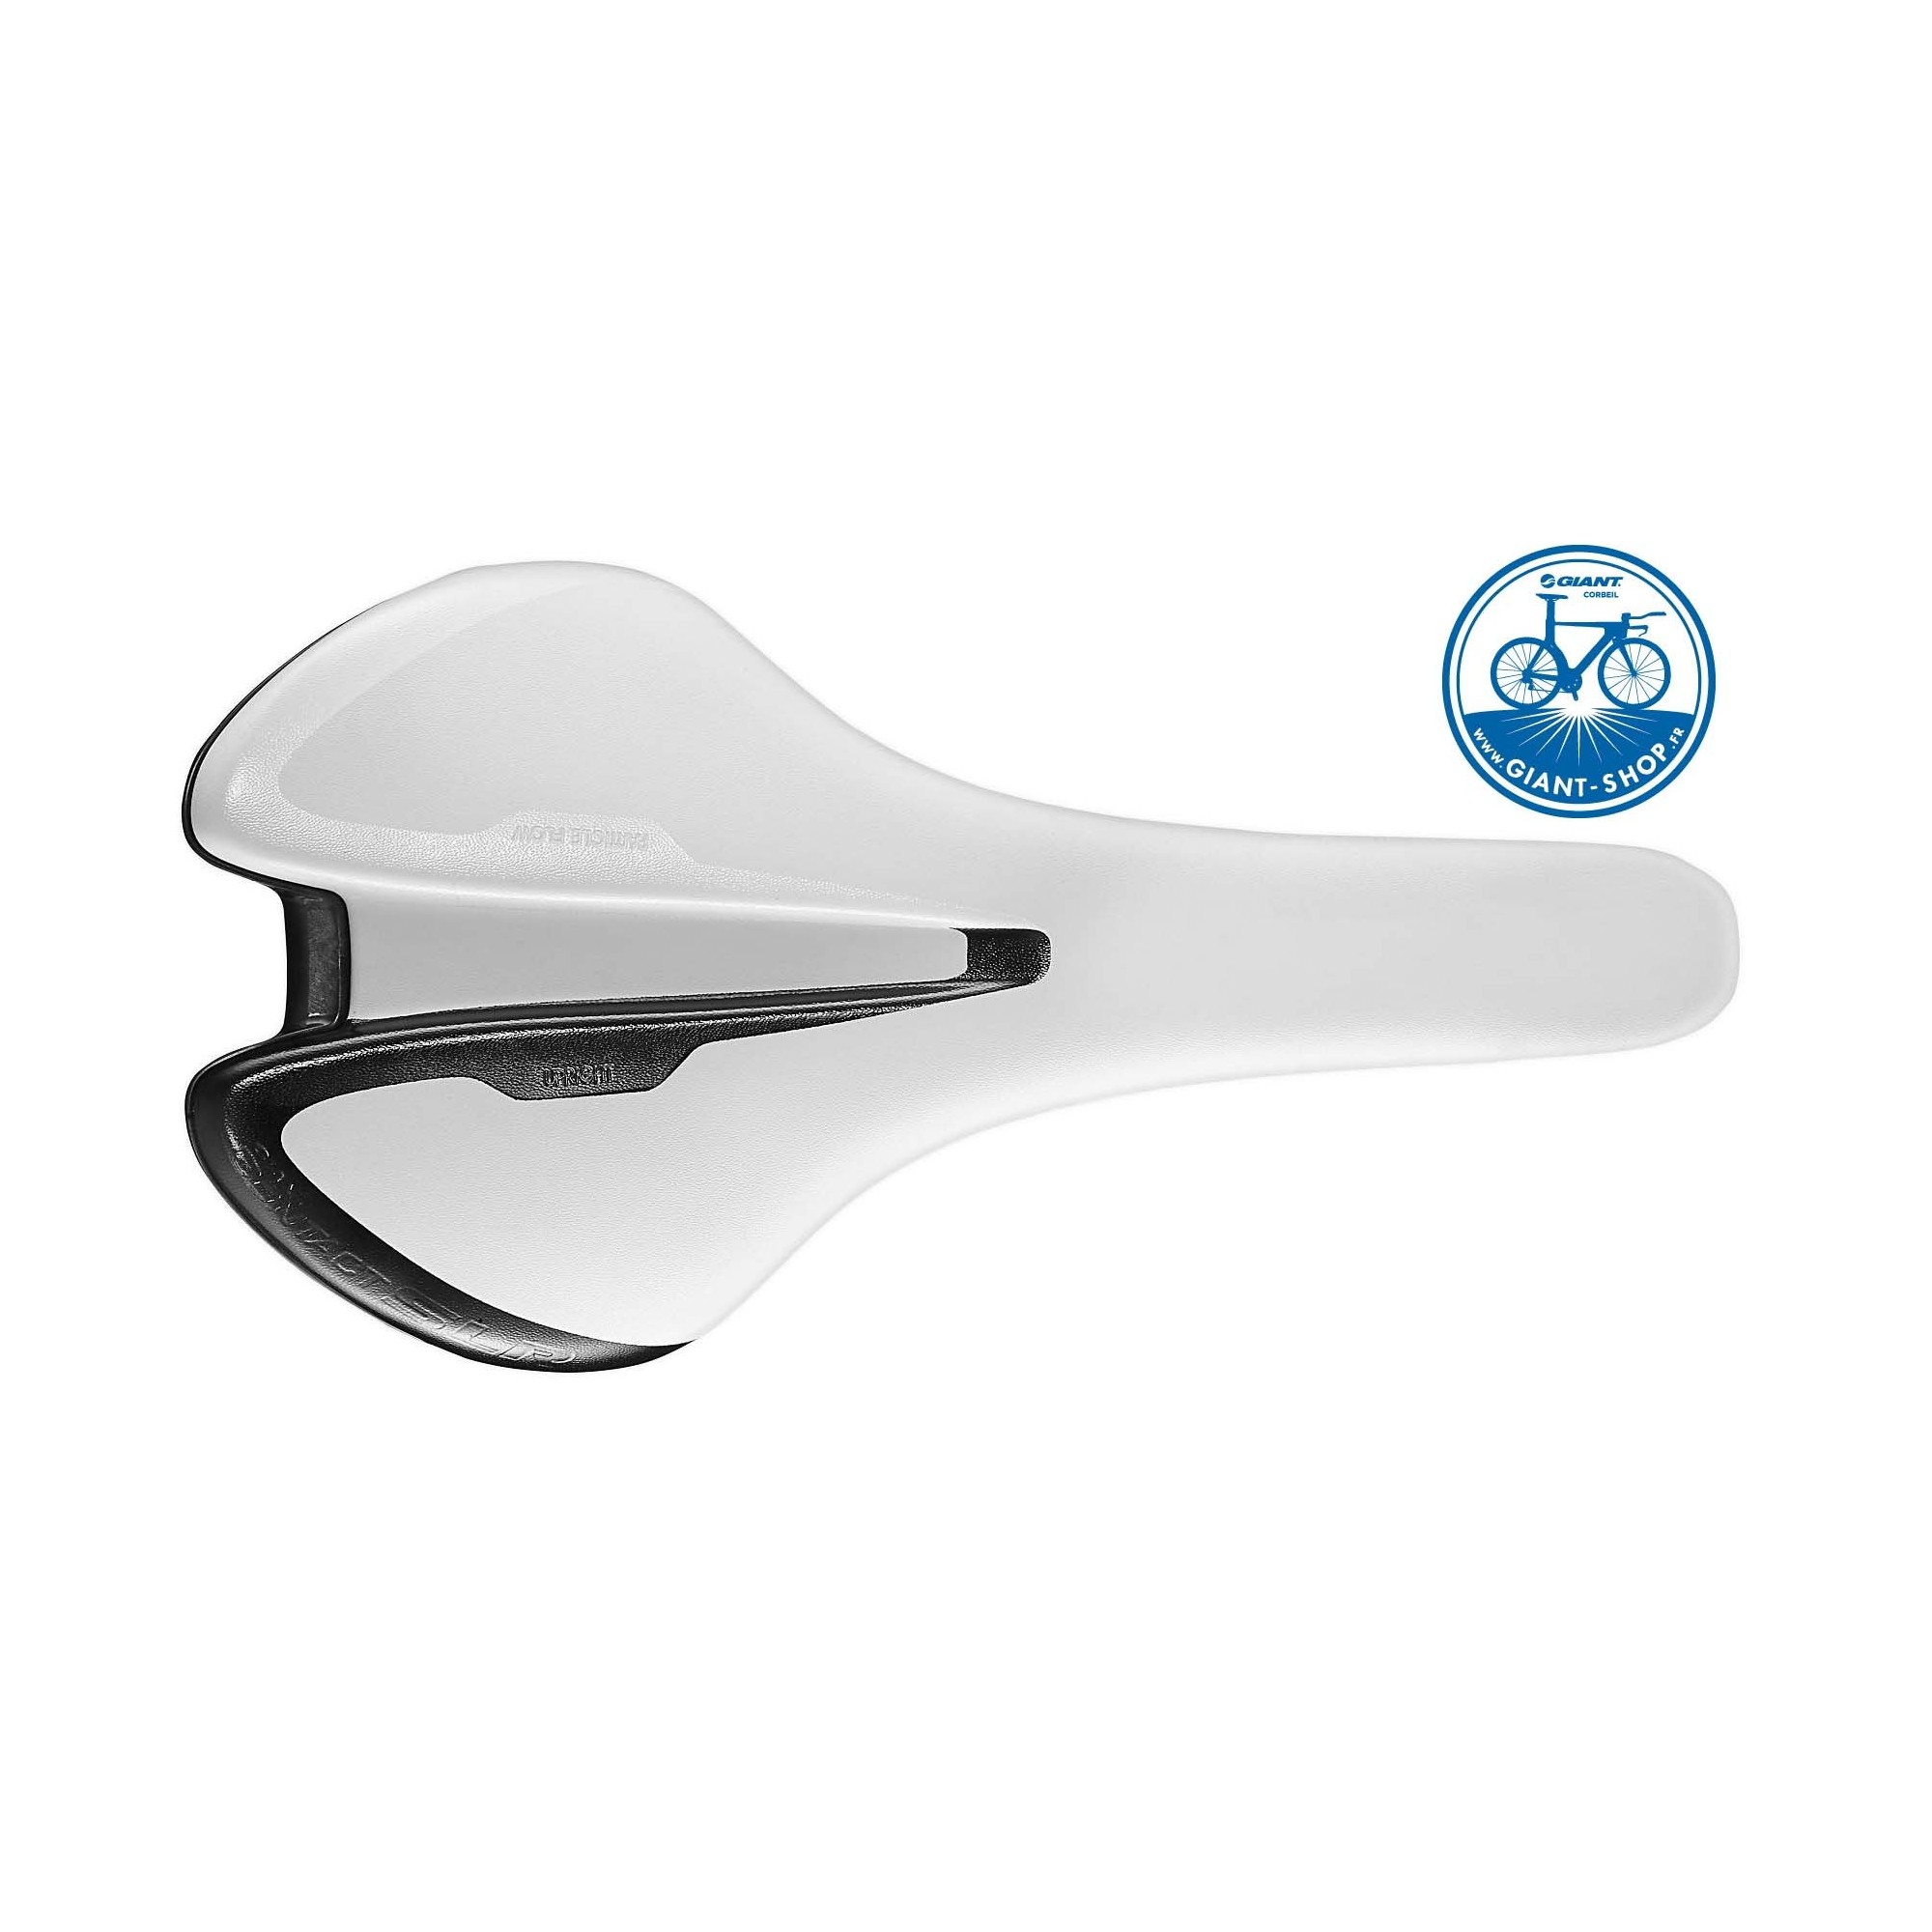 Selle Giant Contact SLR Upright Blanche